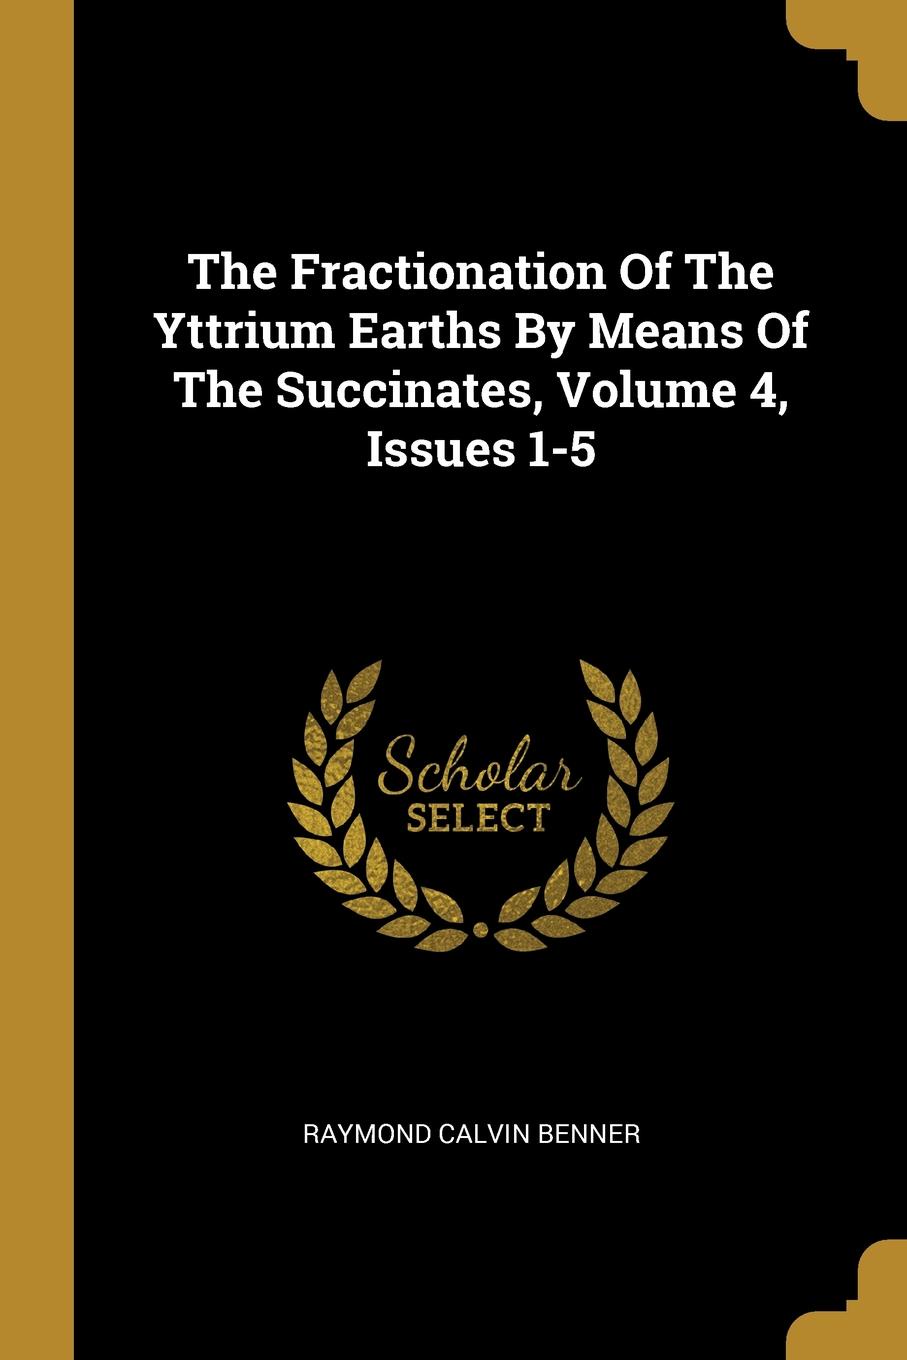 The Fractionation Of The Yttrium Earths By Means Of The Succinates, Volume 4, Issues 1-5